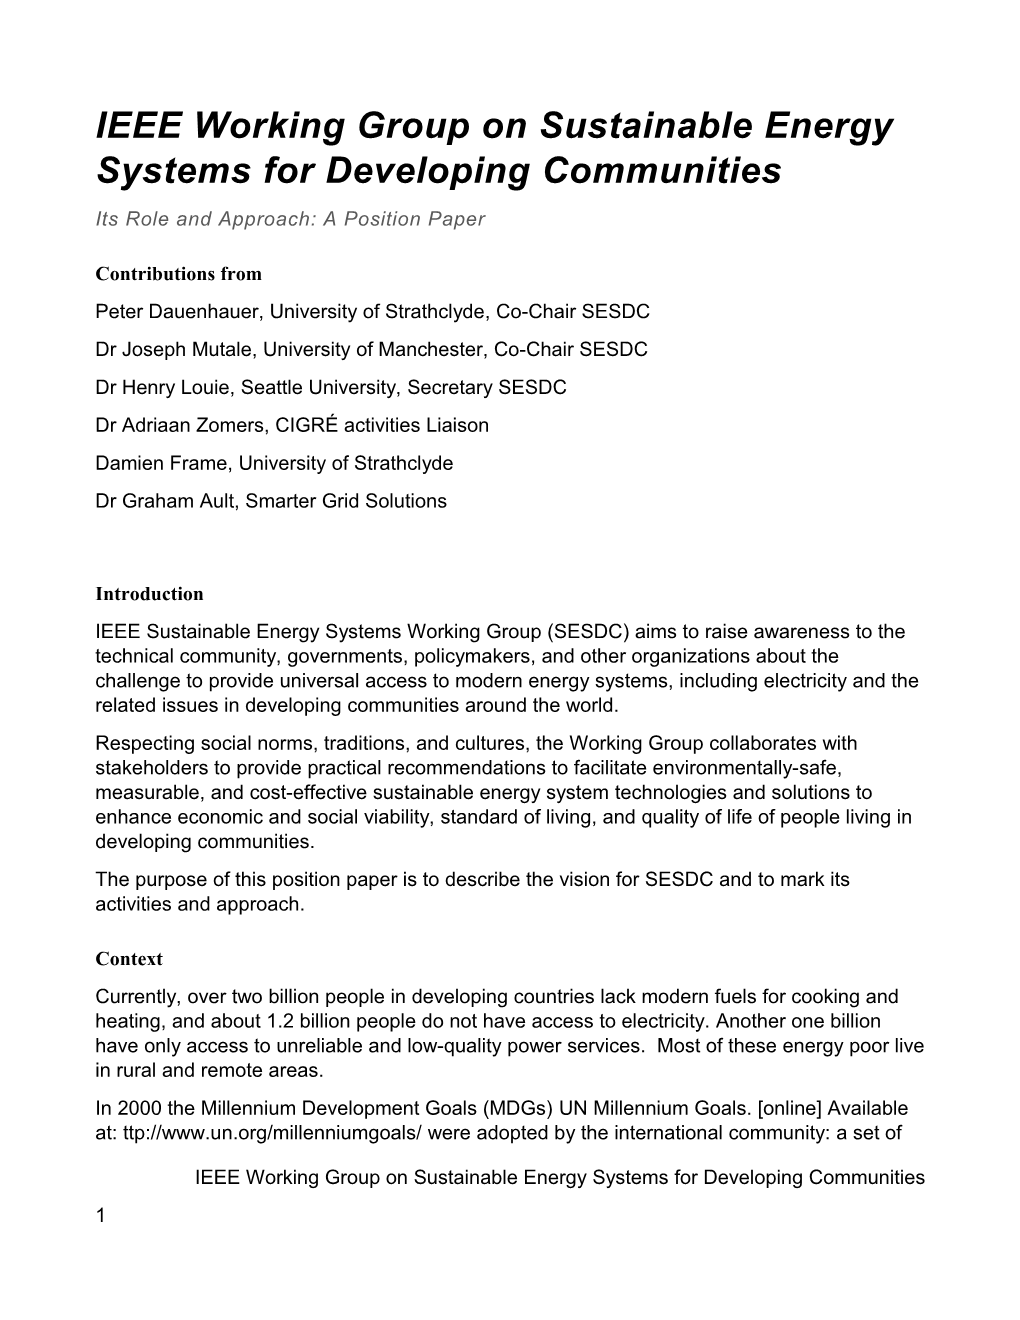 IEEE Working Group on Sustainable Energy Systems for Developing Communities